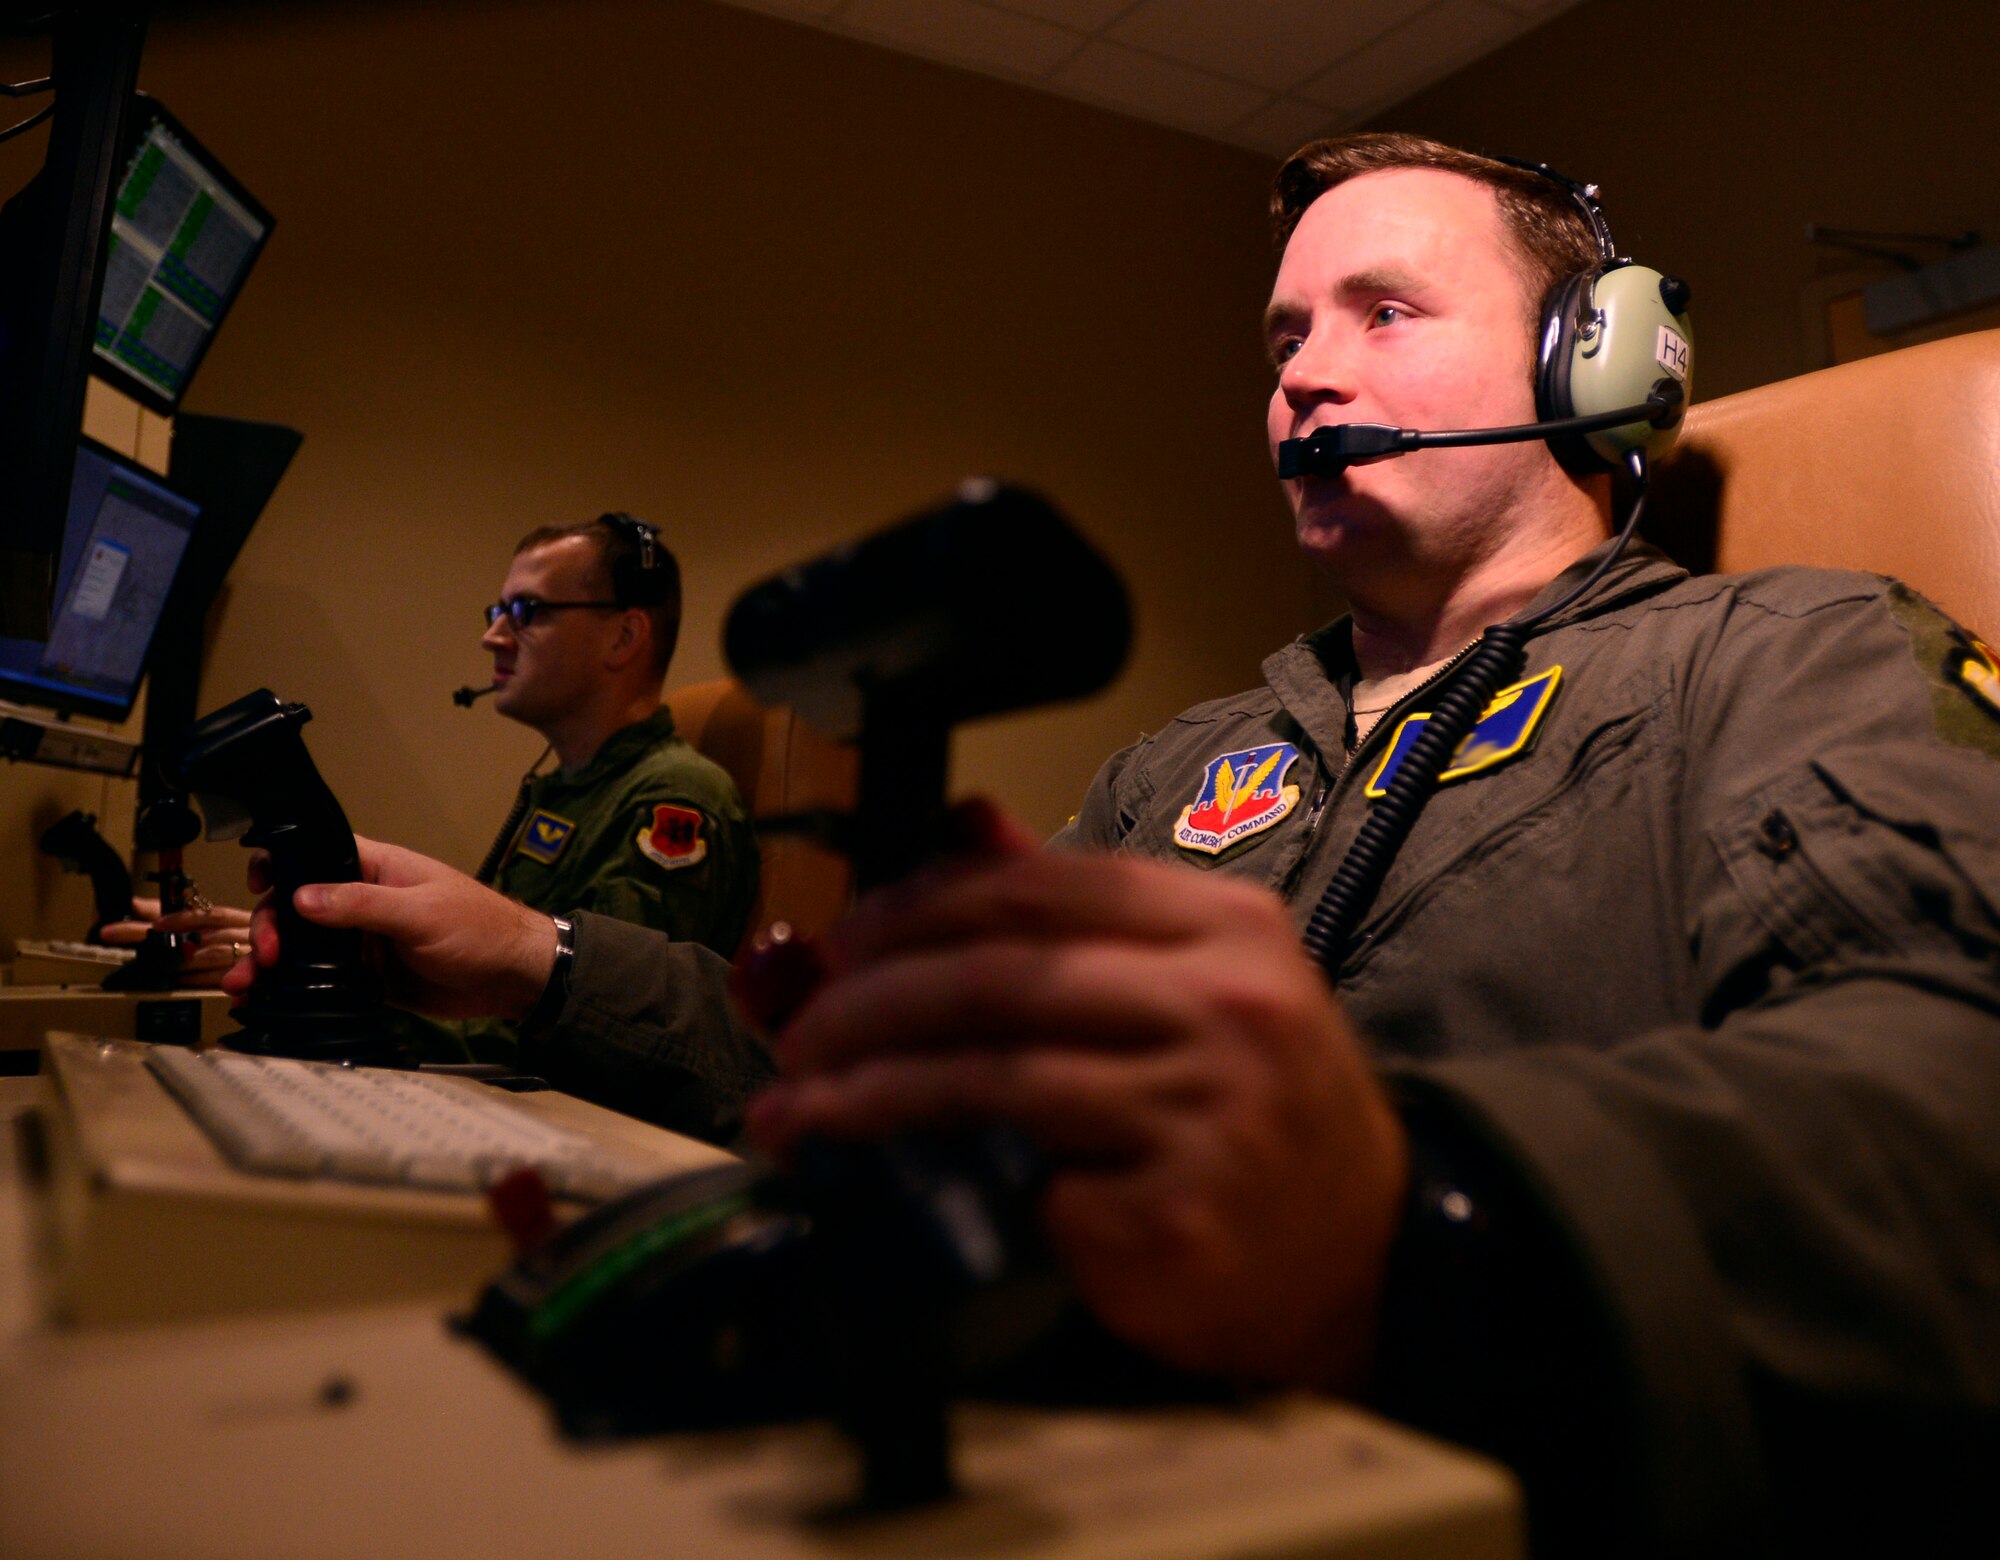 Capt. Jonathan, a 432nd Wing pilot, left, and Staff Sgt. Matthew, a 432nd WG sensor operator, fly a training mission Oct. 13, 2015, at Creech Air Force Base, Nev. (U.S. Air Force photo/Airman 1st Class Christian Clausen)
